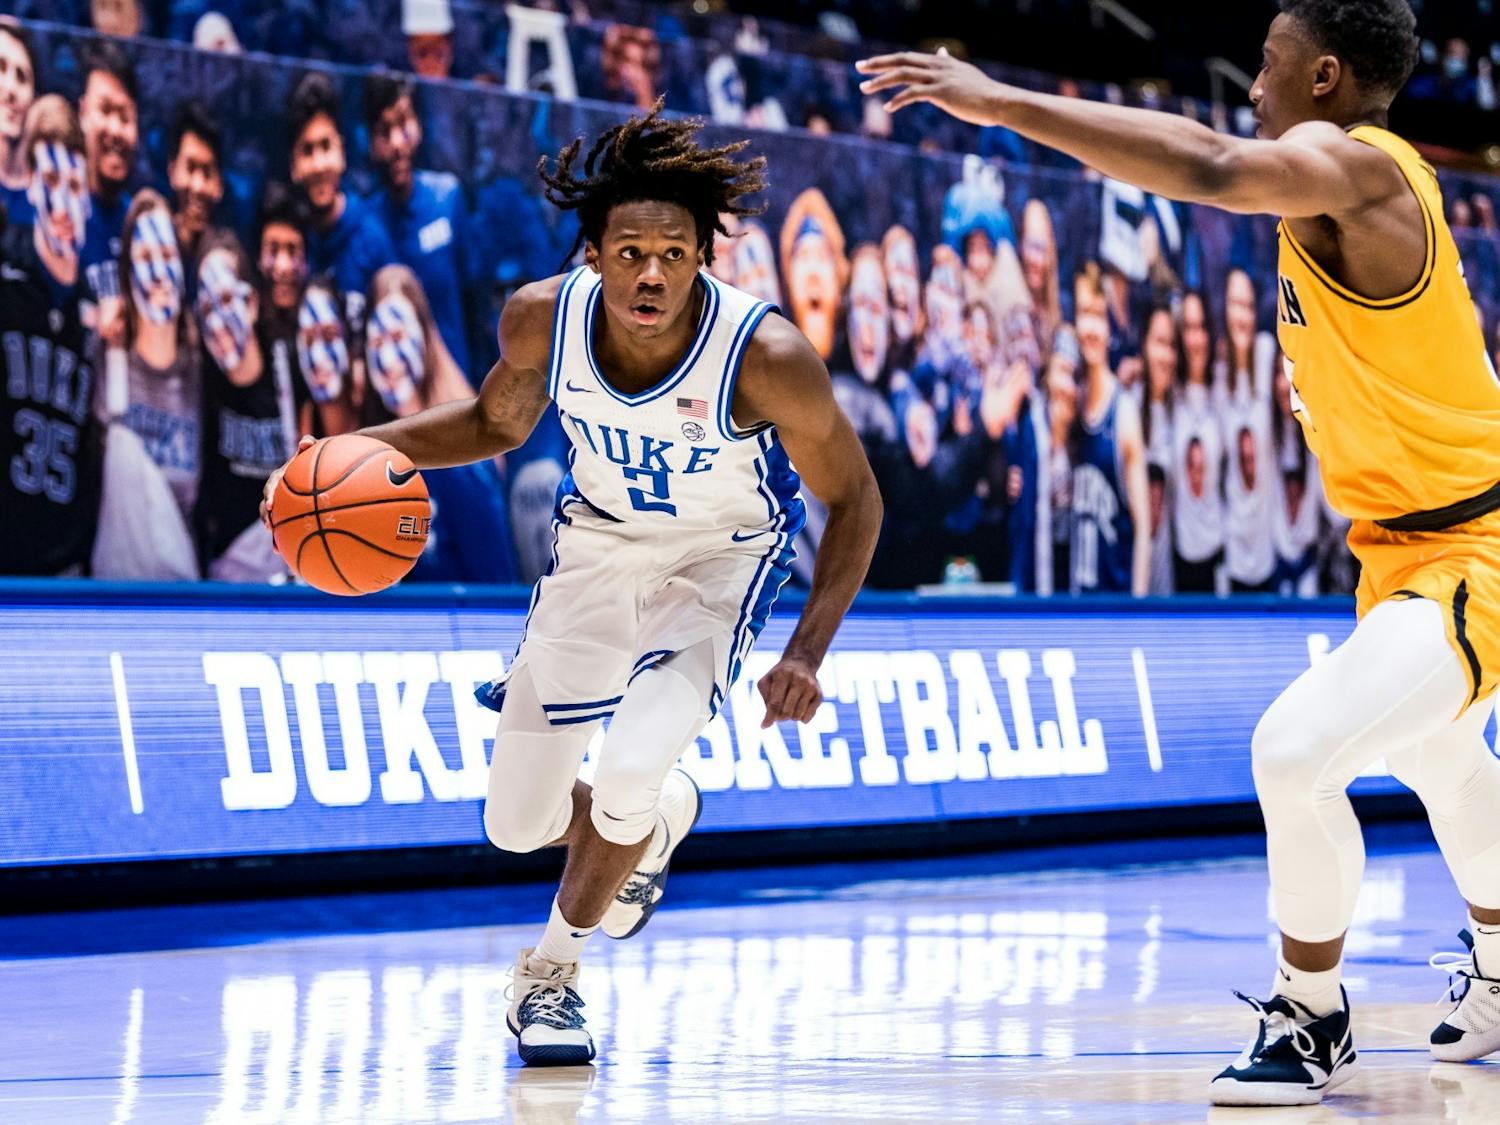 Steward is Duke's second-leading scorer with 11.8 points per contest.